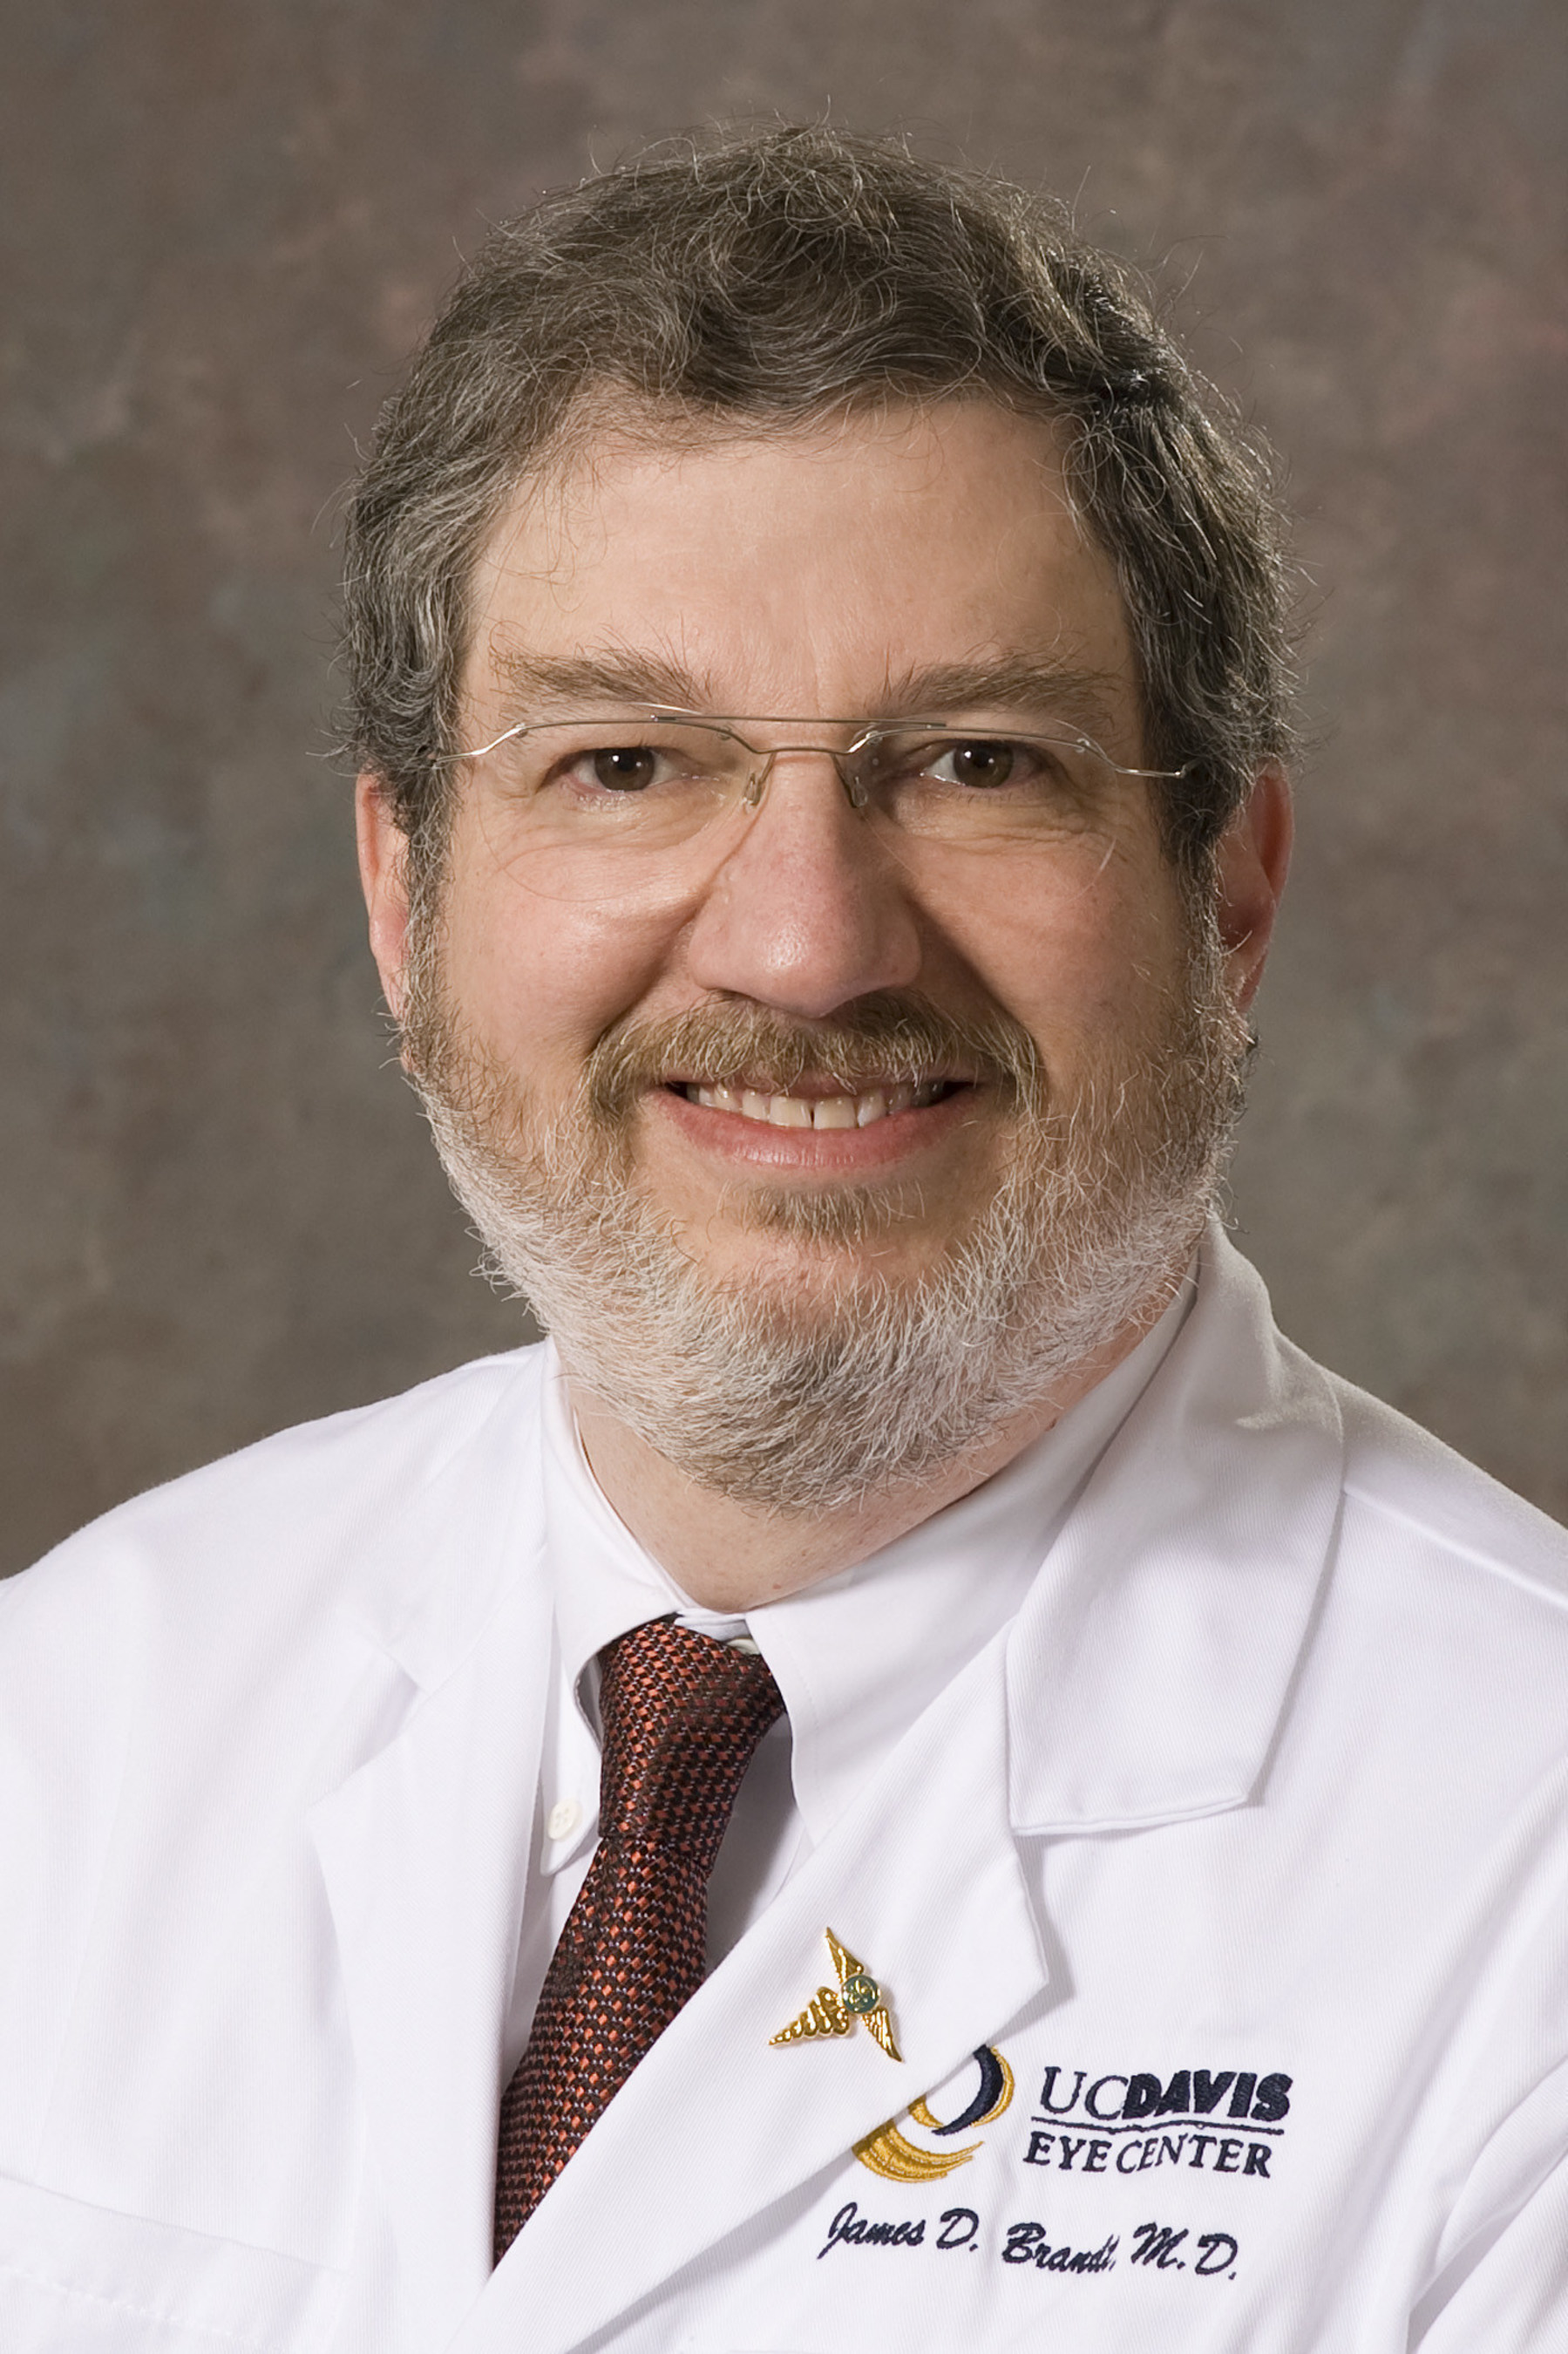 James D. Brandt, M.D., author of new research on a non-invasive sustained release glaucoma drug delivery device published May 5, 2016 in Ophthalmology, journal of the American Academy of Ophthalmology.